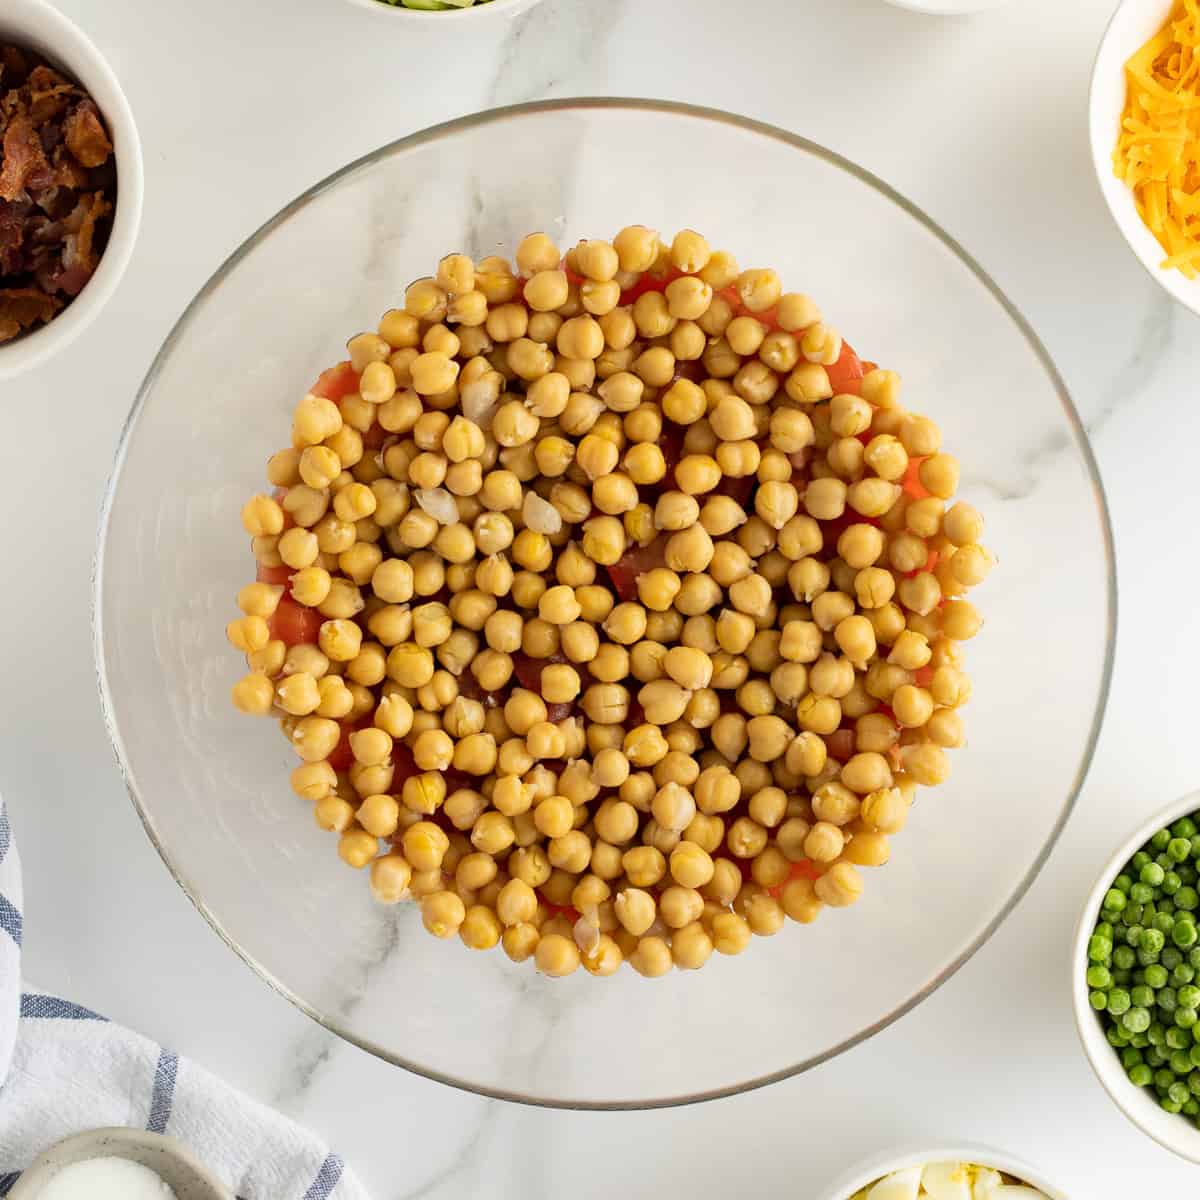 A layer of garbanzo beans in a glass bowl.